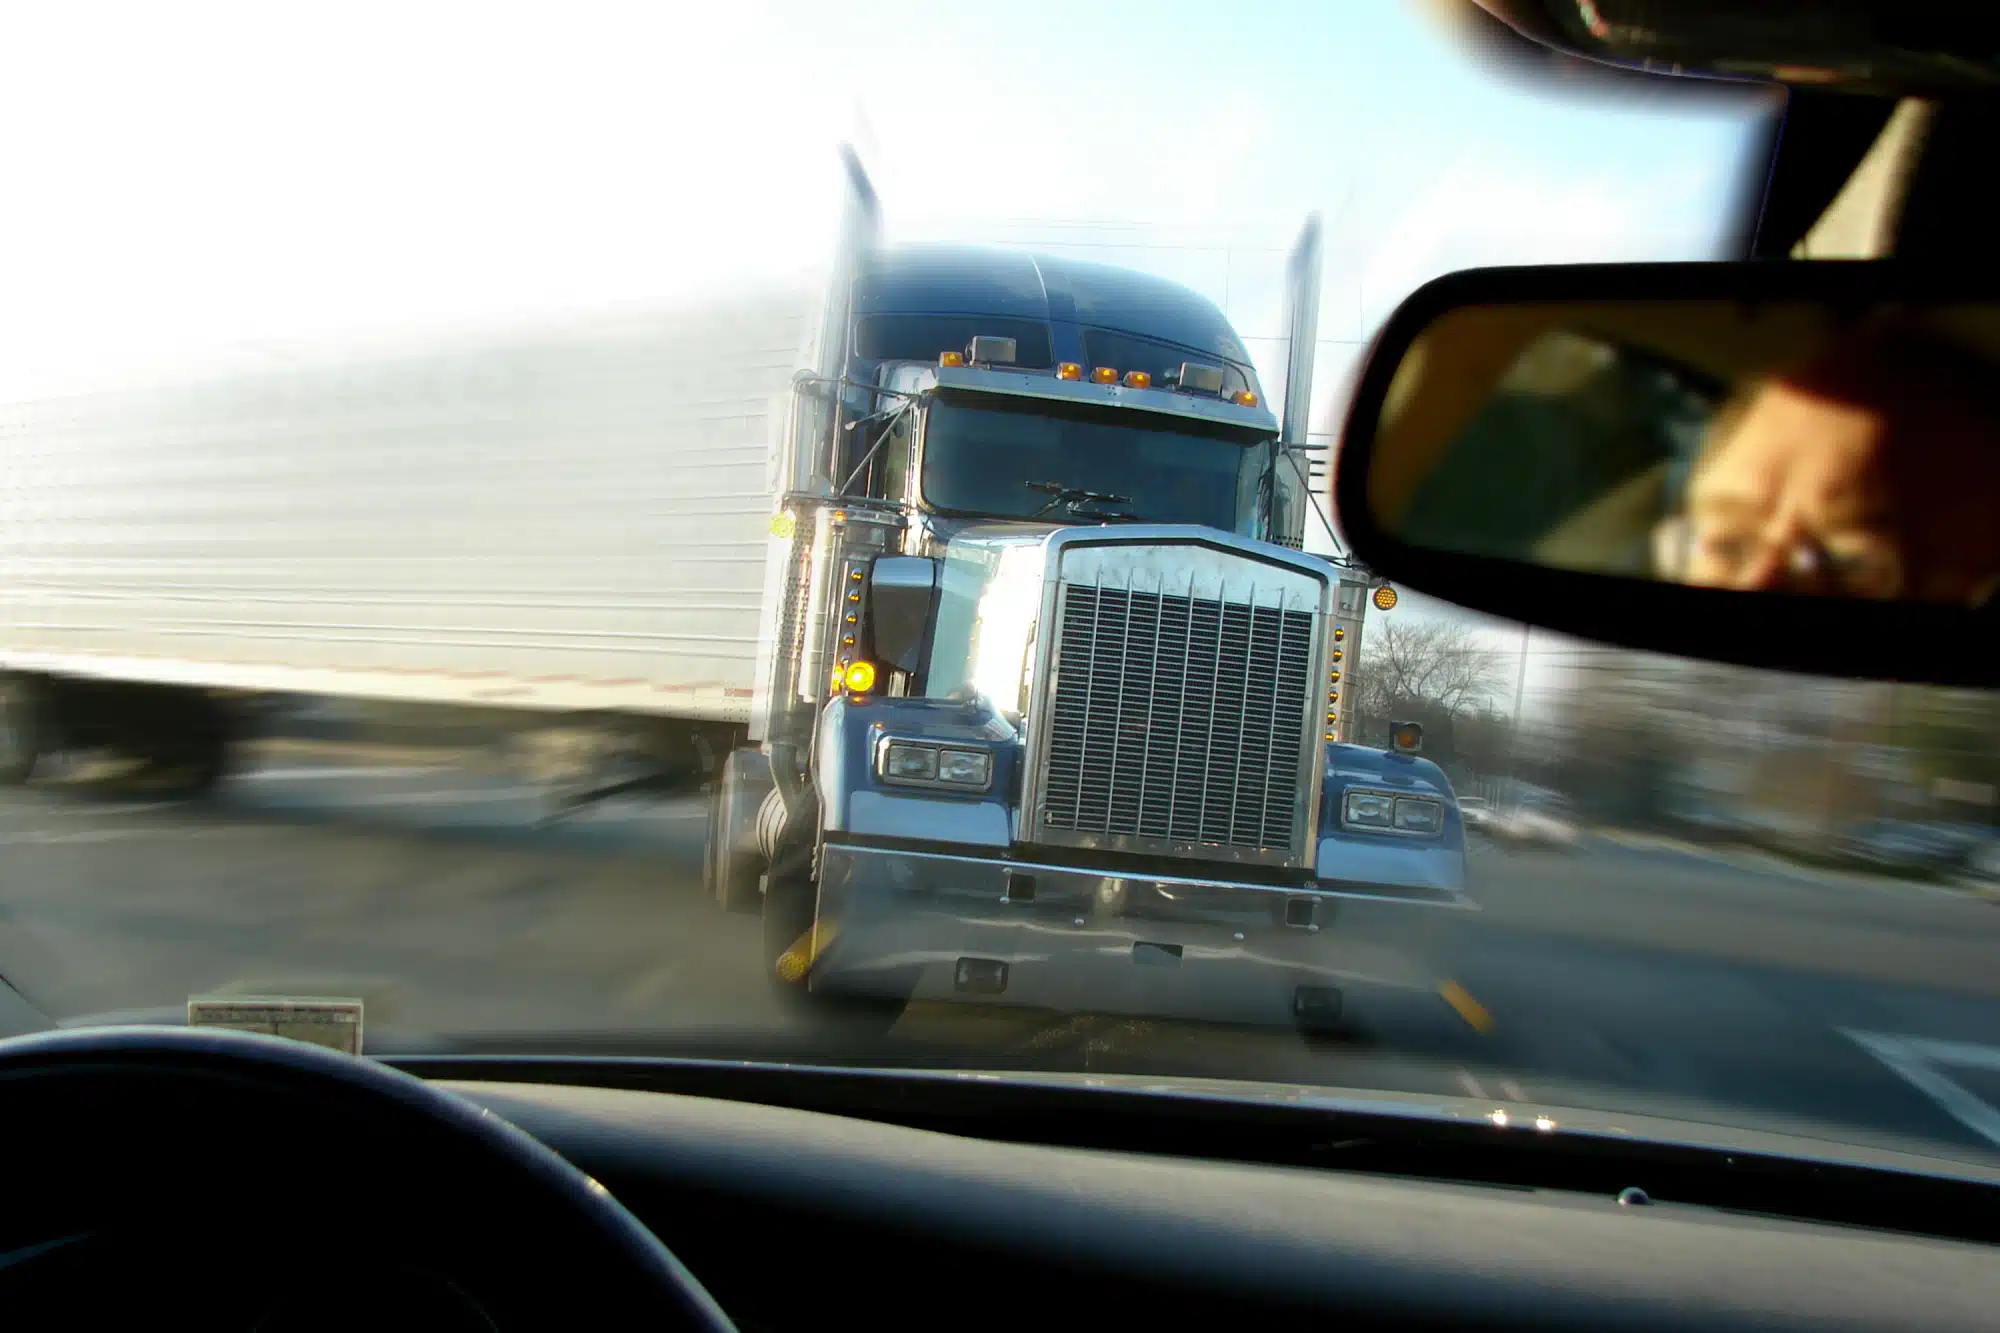 View over a car’s dashboard of an oncoming semi-truck.